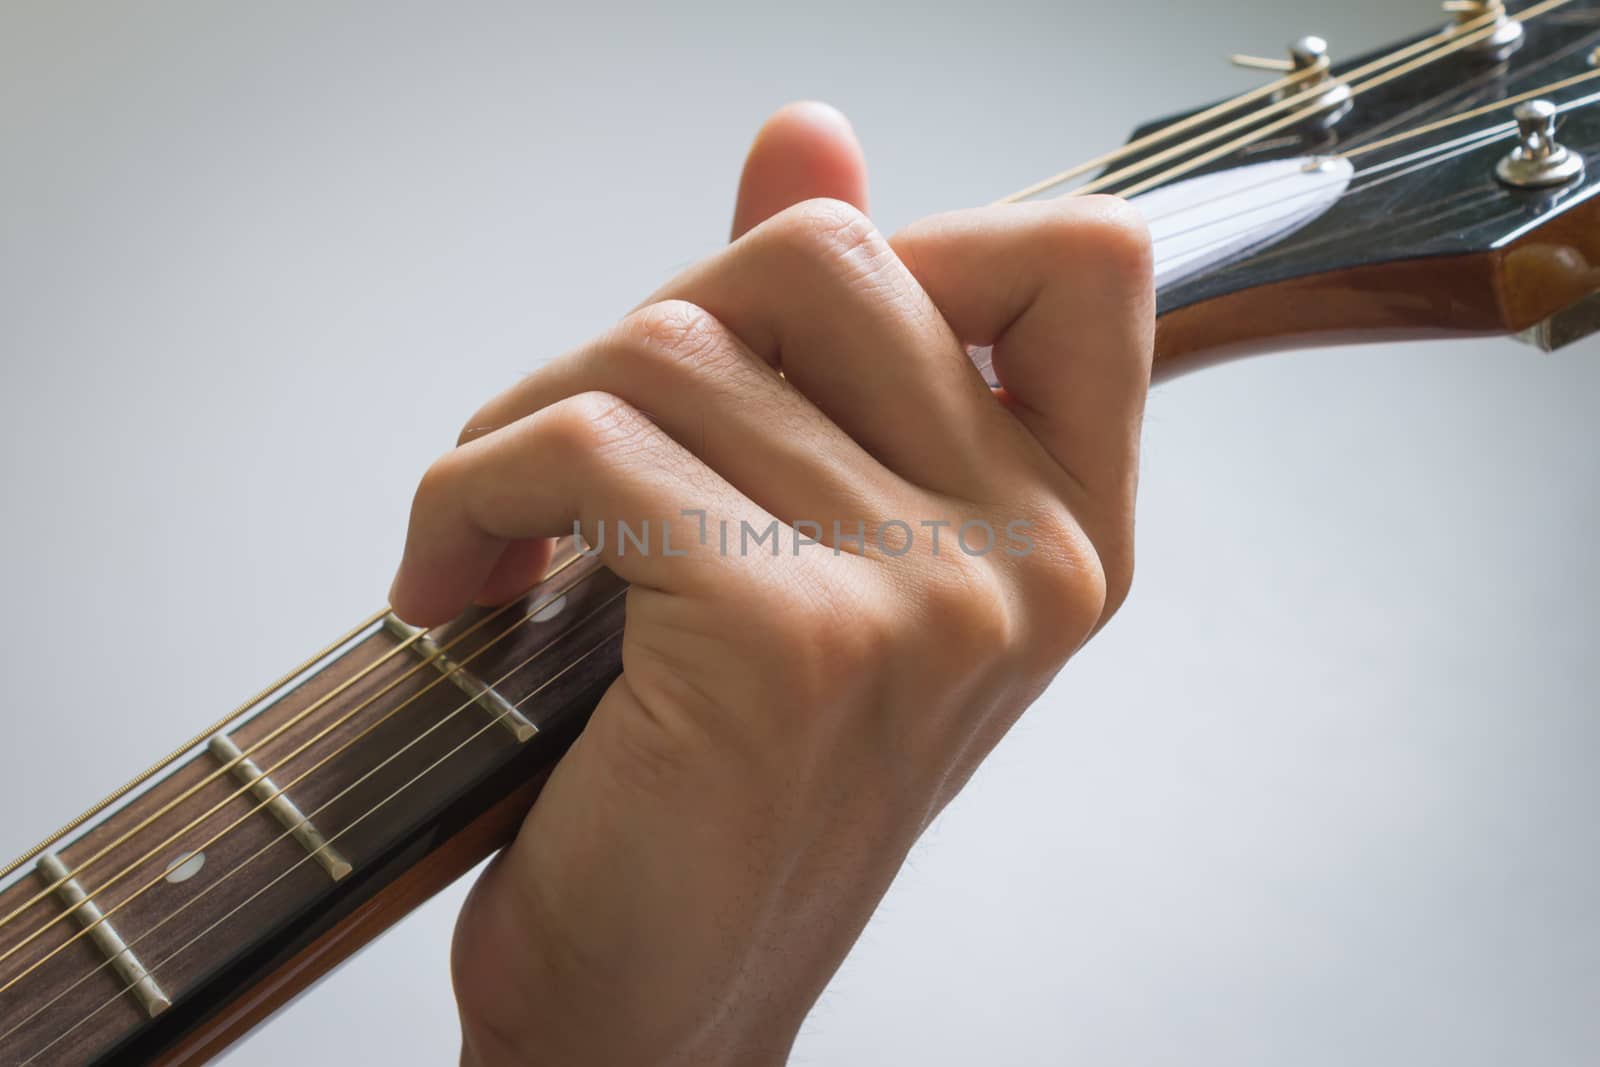 Guitar Player Hand or Musician Hand in C Major Chord on Acoustic Guitar String with soft natural light in close up view